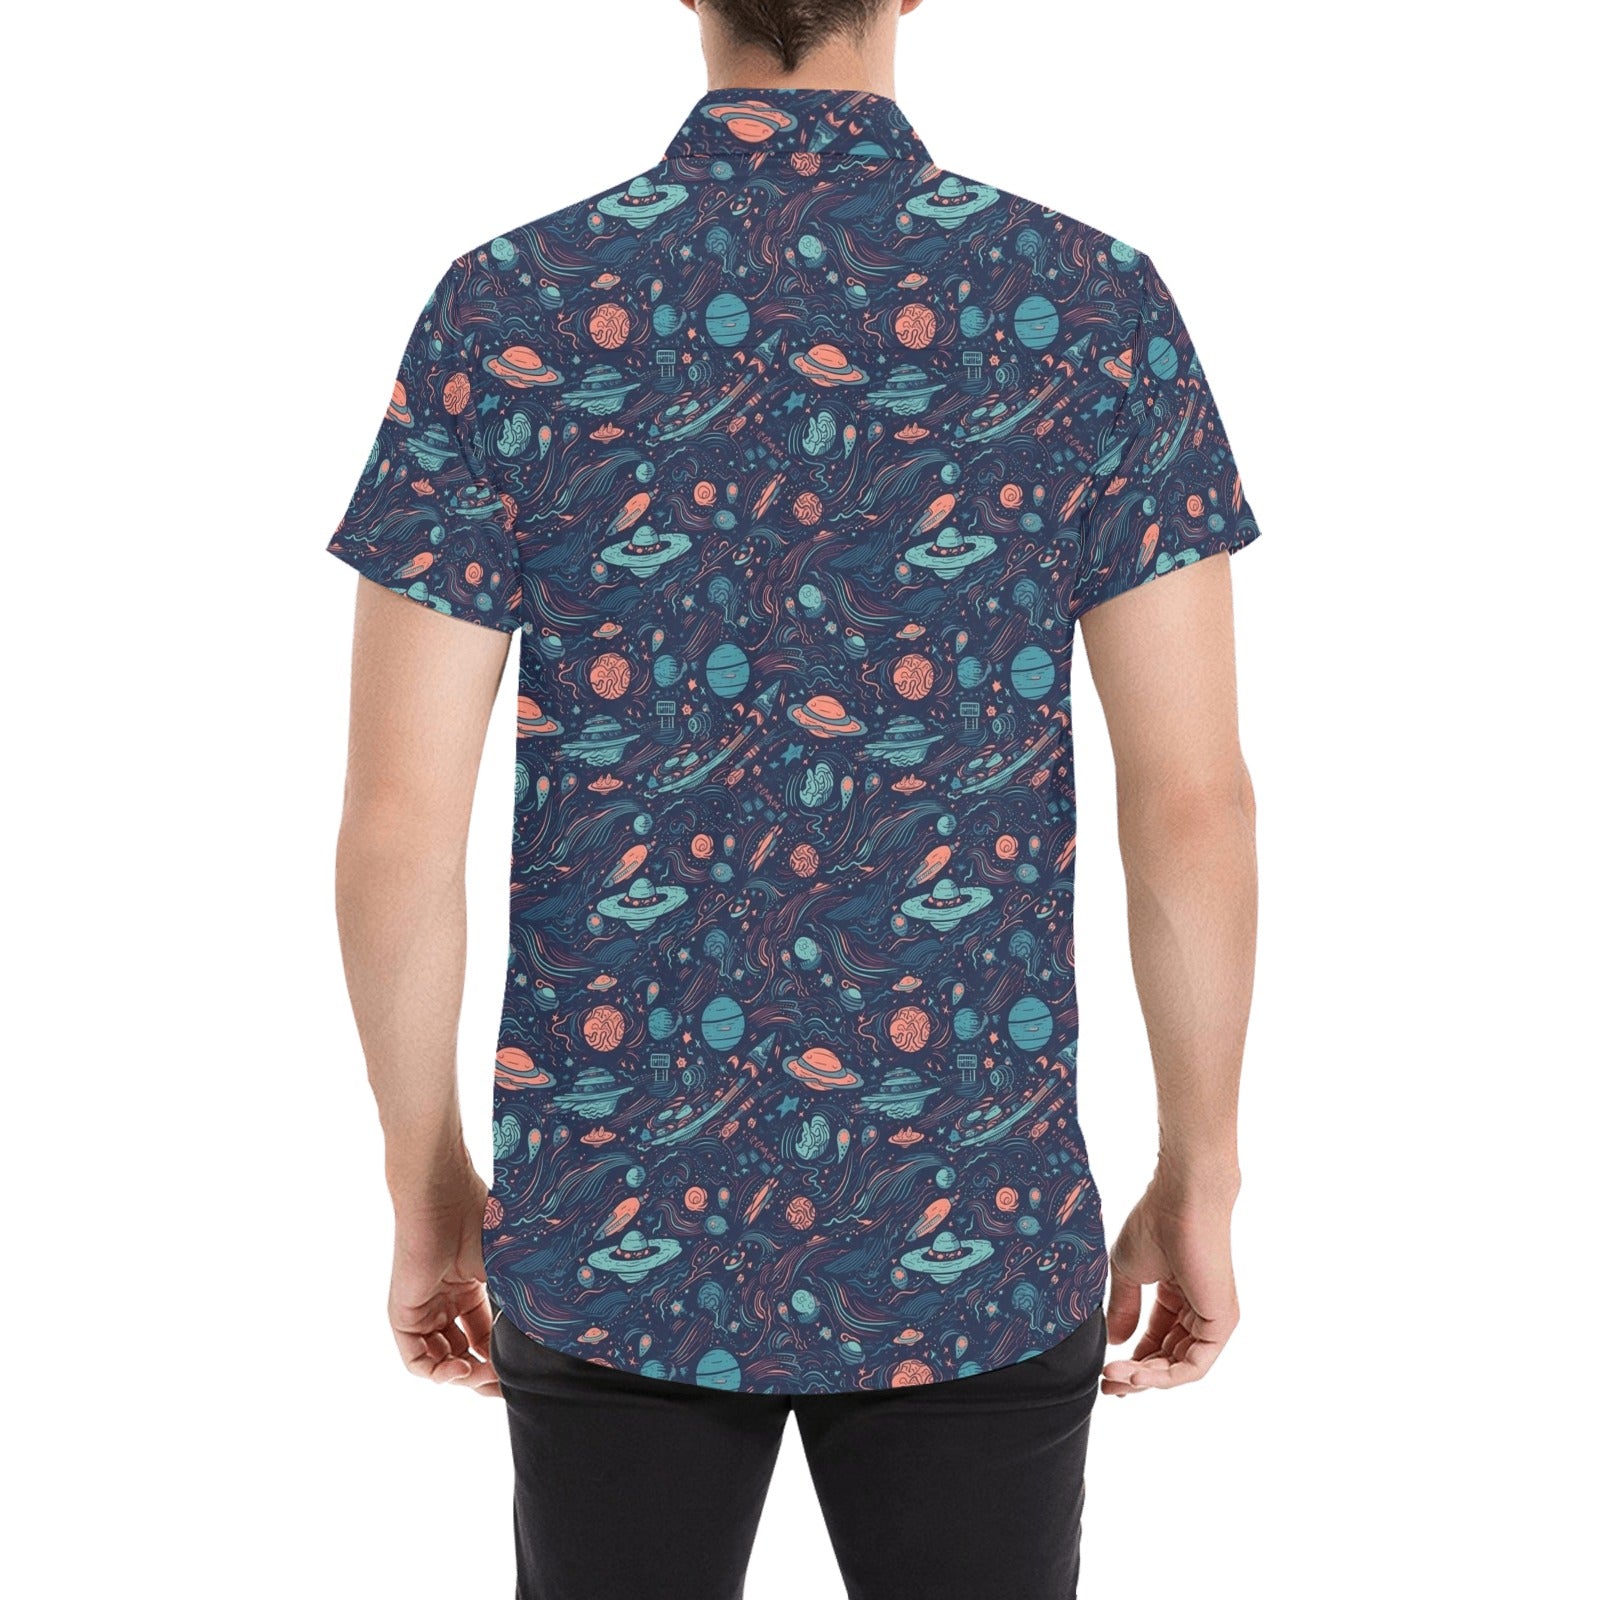 Space Short Sleeve Men Button Down Shirt, Galaxy Space Ship Geek Constellation Universe Print Casual Buttoned Up Collared Dress Plus Size Starcove Fashion